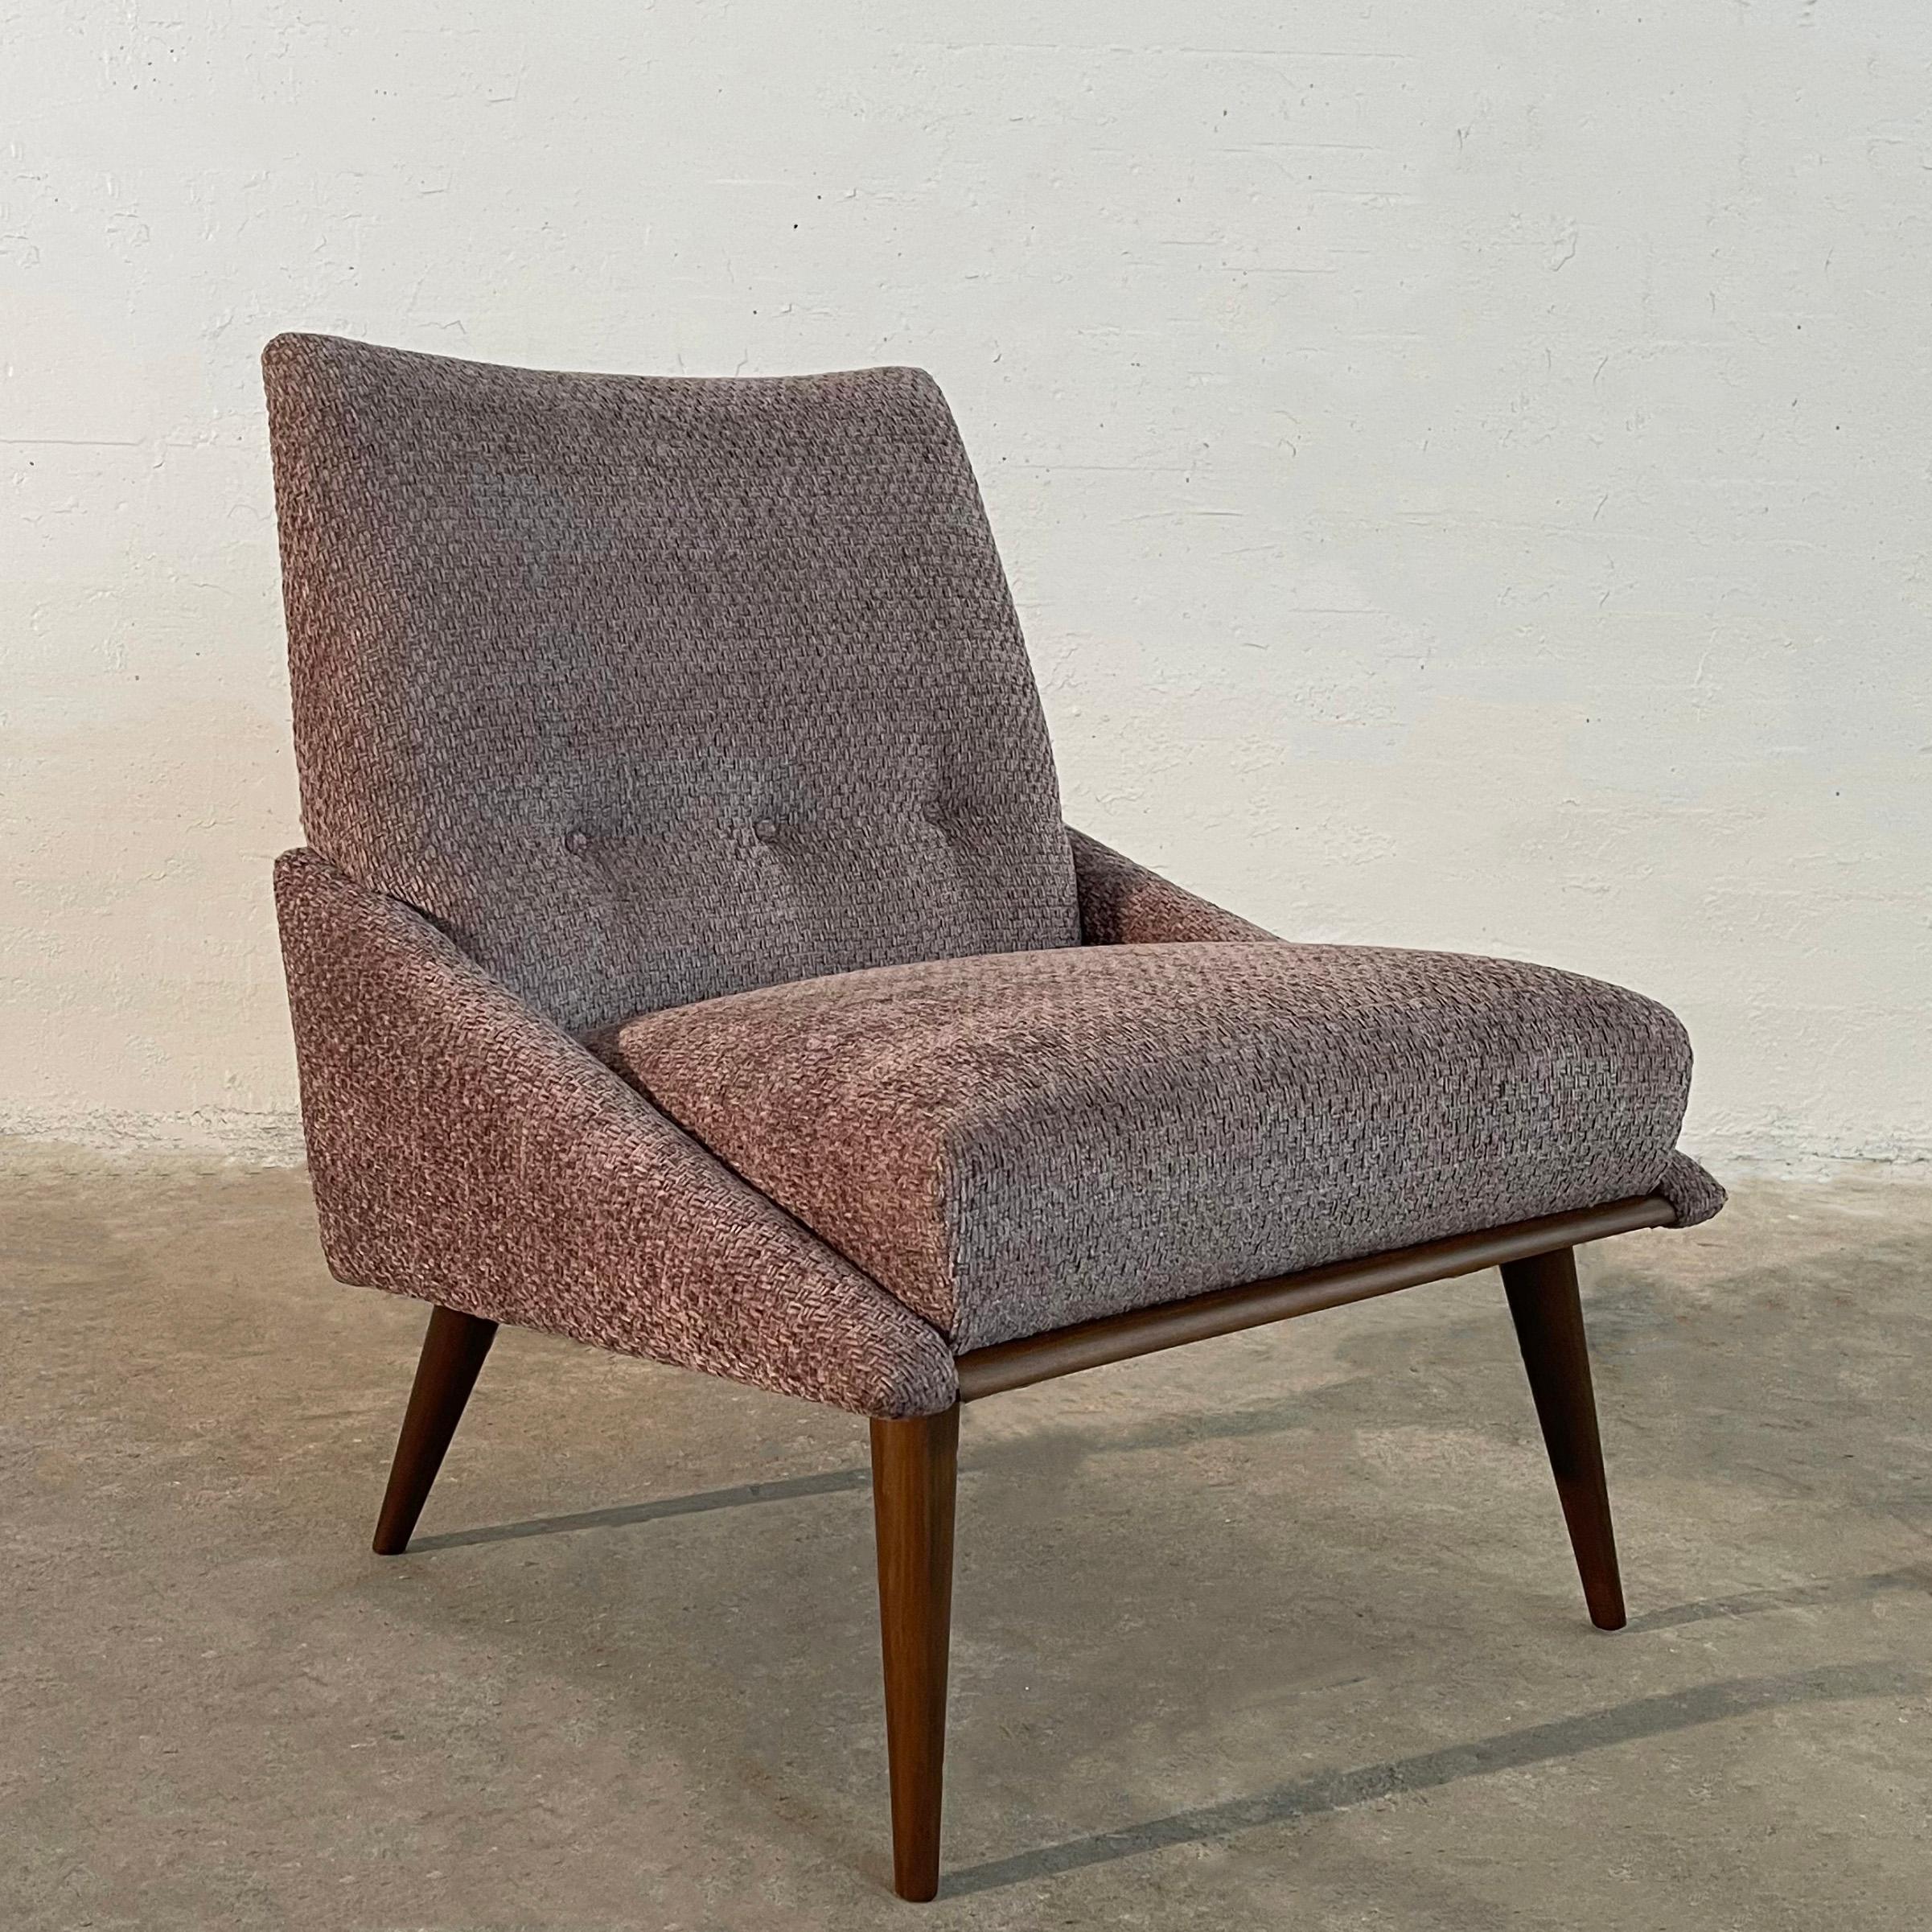 Sleek, mid-century modern, walnut frame, slipper chair by Kroehler is newly upholstered in sumptuous taupe chenille. With it's tucked sides and tapered legs, it's the perfect midcentury accent chair for any room. 